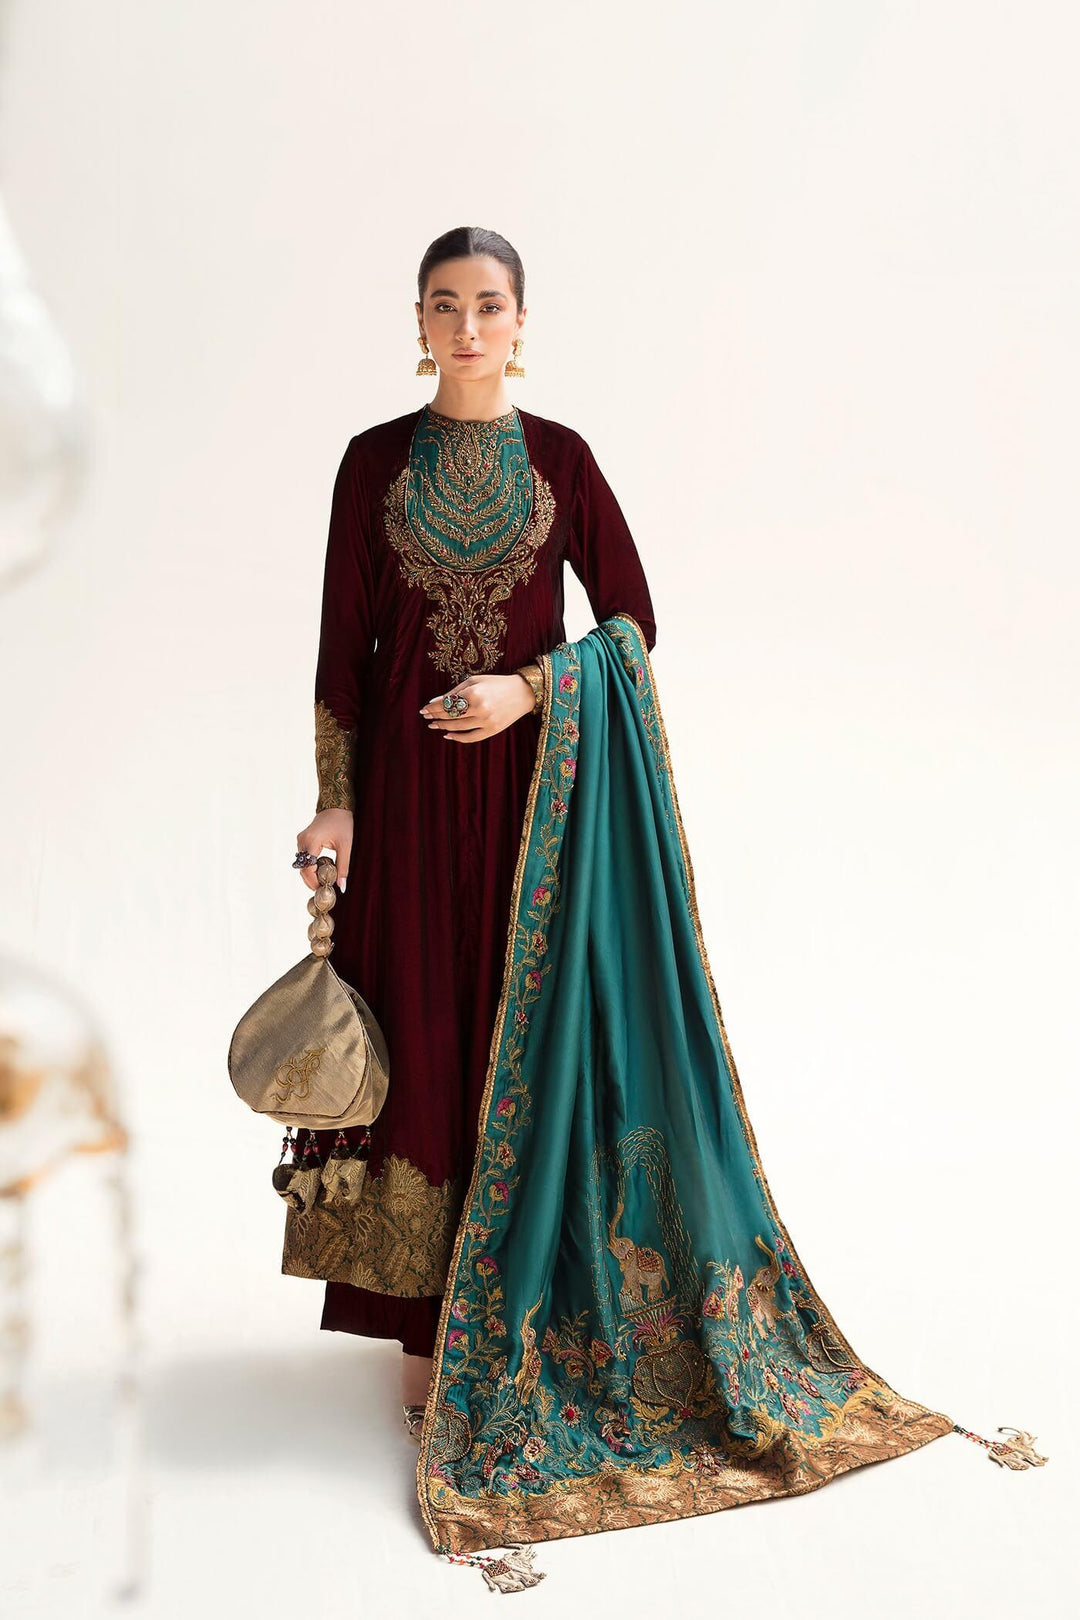 Nilofer Shahid - Velvet Embroidered Shirt & Pants with Tissue Silk Shawl - 3 Piece - Studio by TCS